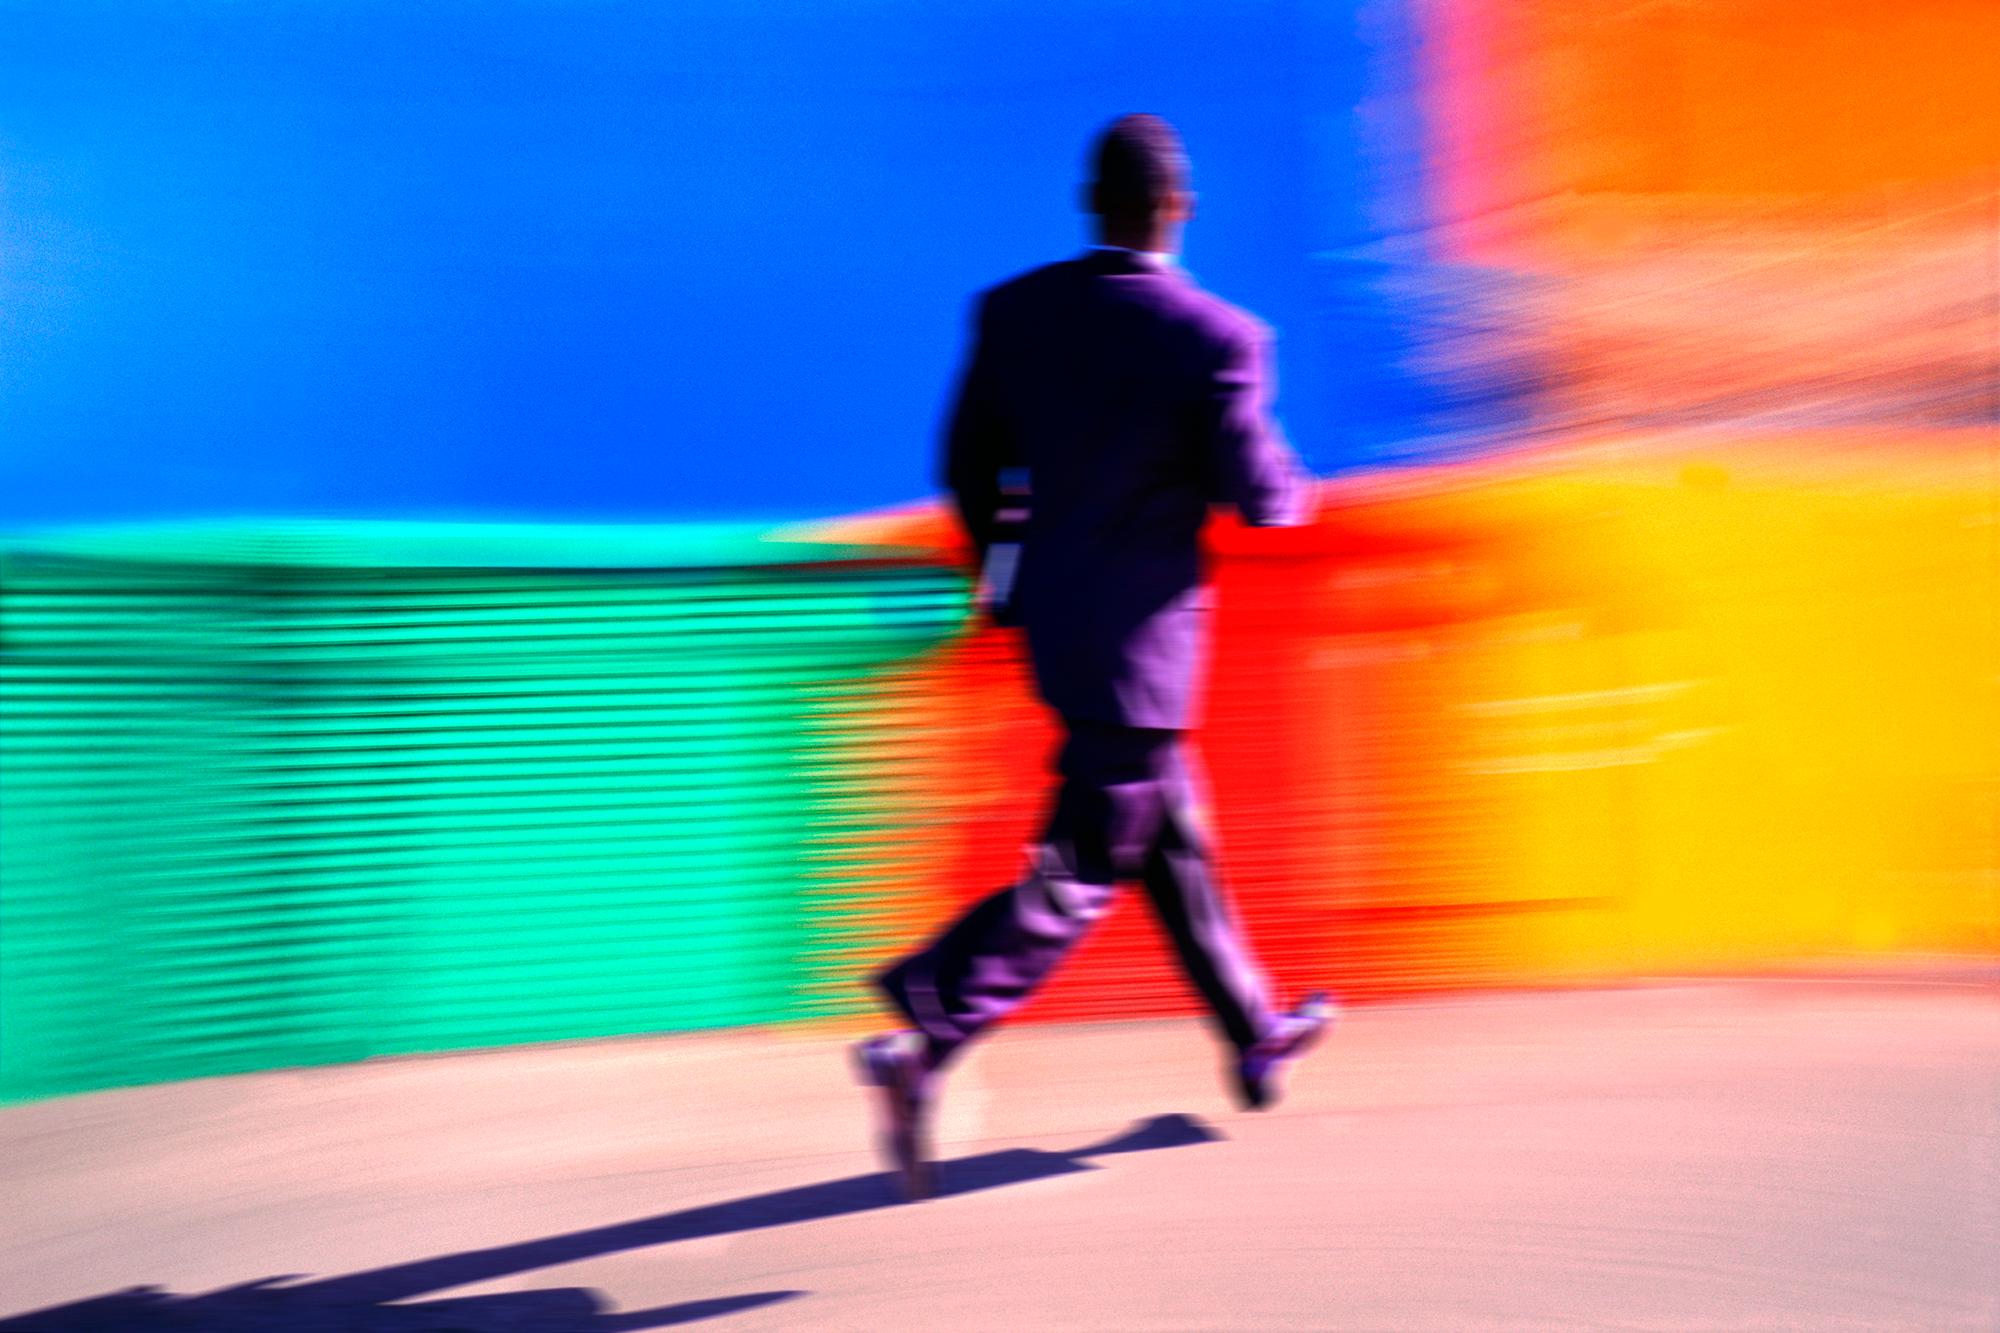 Mitchell Funk Color Photograph - Black Businessman Running Against a Colorful Background